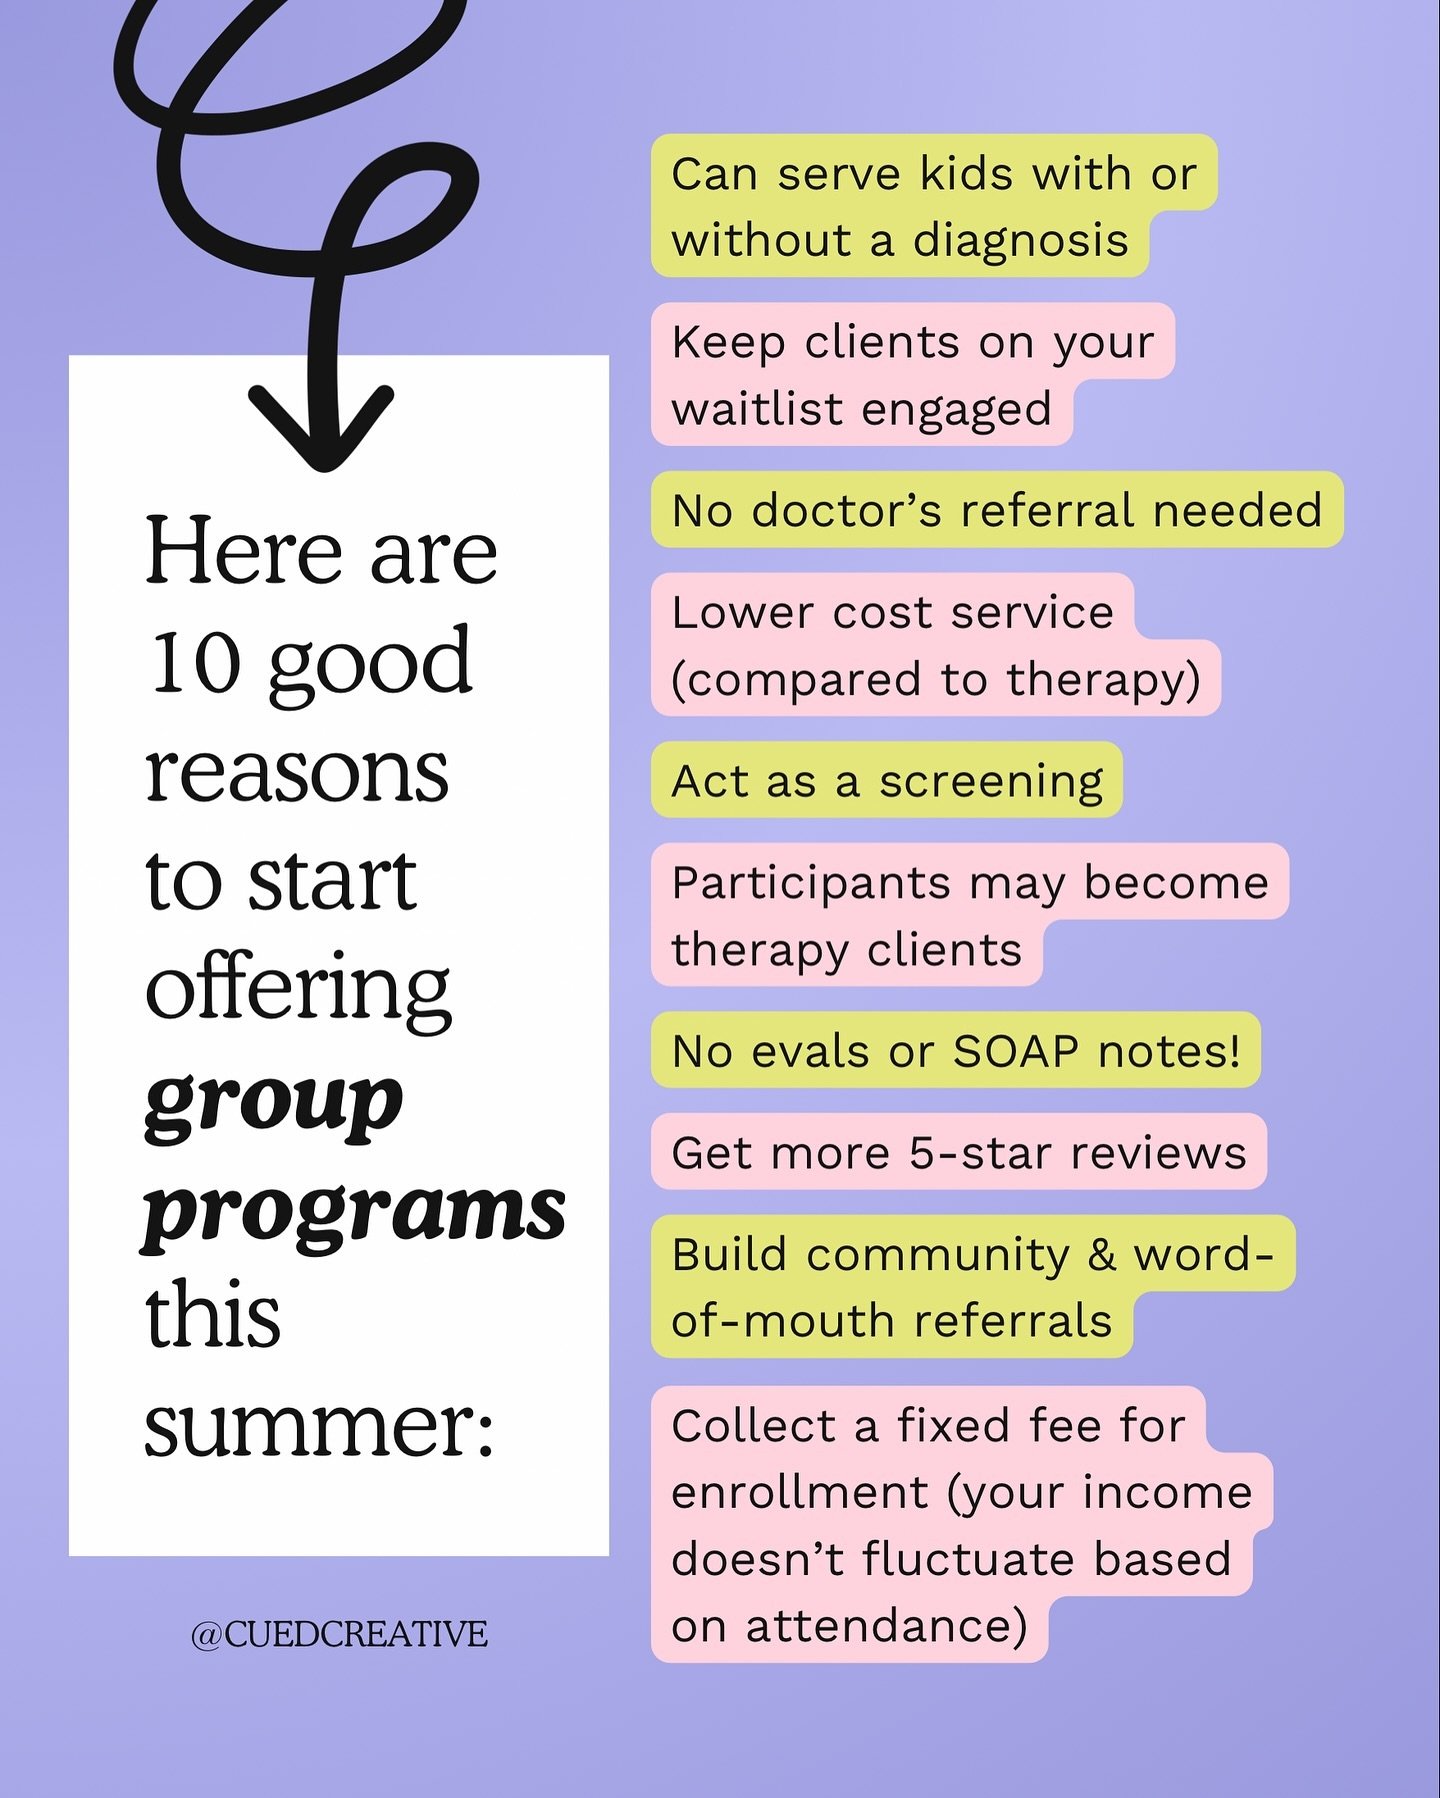 Can&rsquo;t deny it, those are some very good reasons to add groups or camps to your private practice. 

Or if you&rsquo;re a school-based therapist, this is a great side hustle to bring in extra money over the summer. 

Our groups course is going to